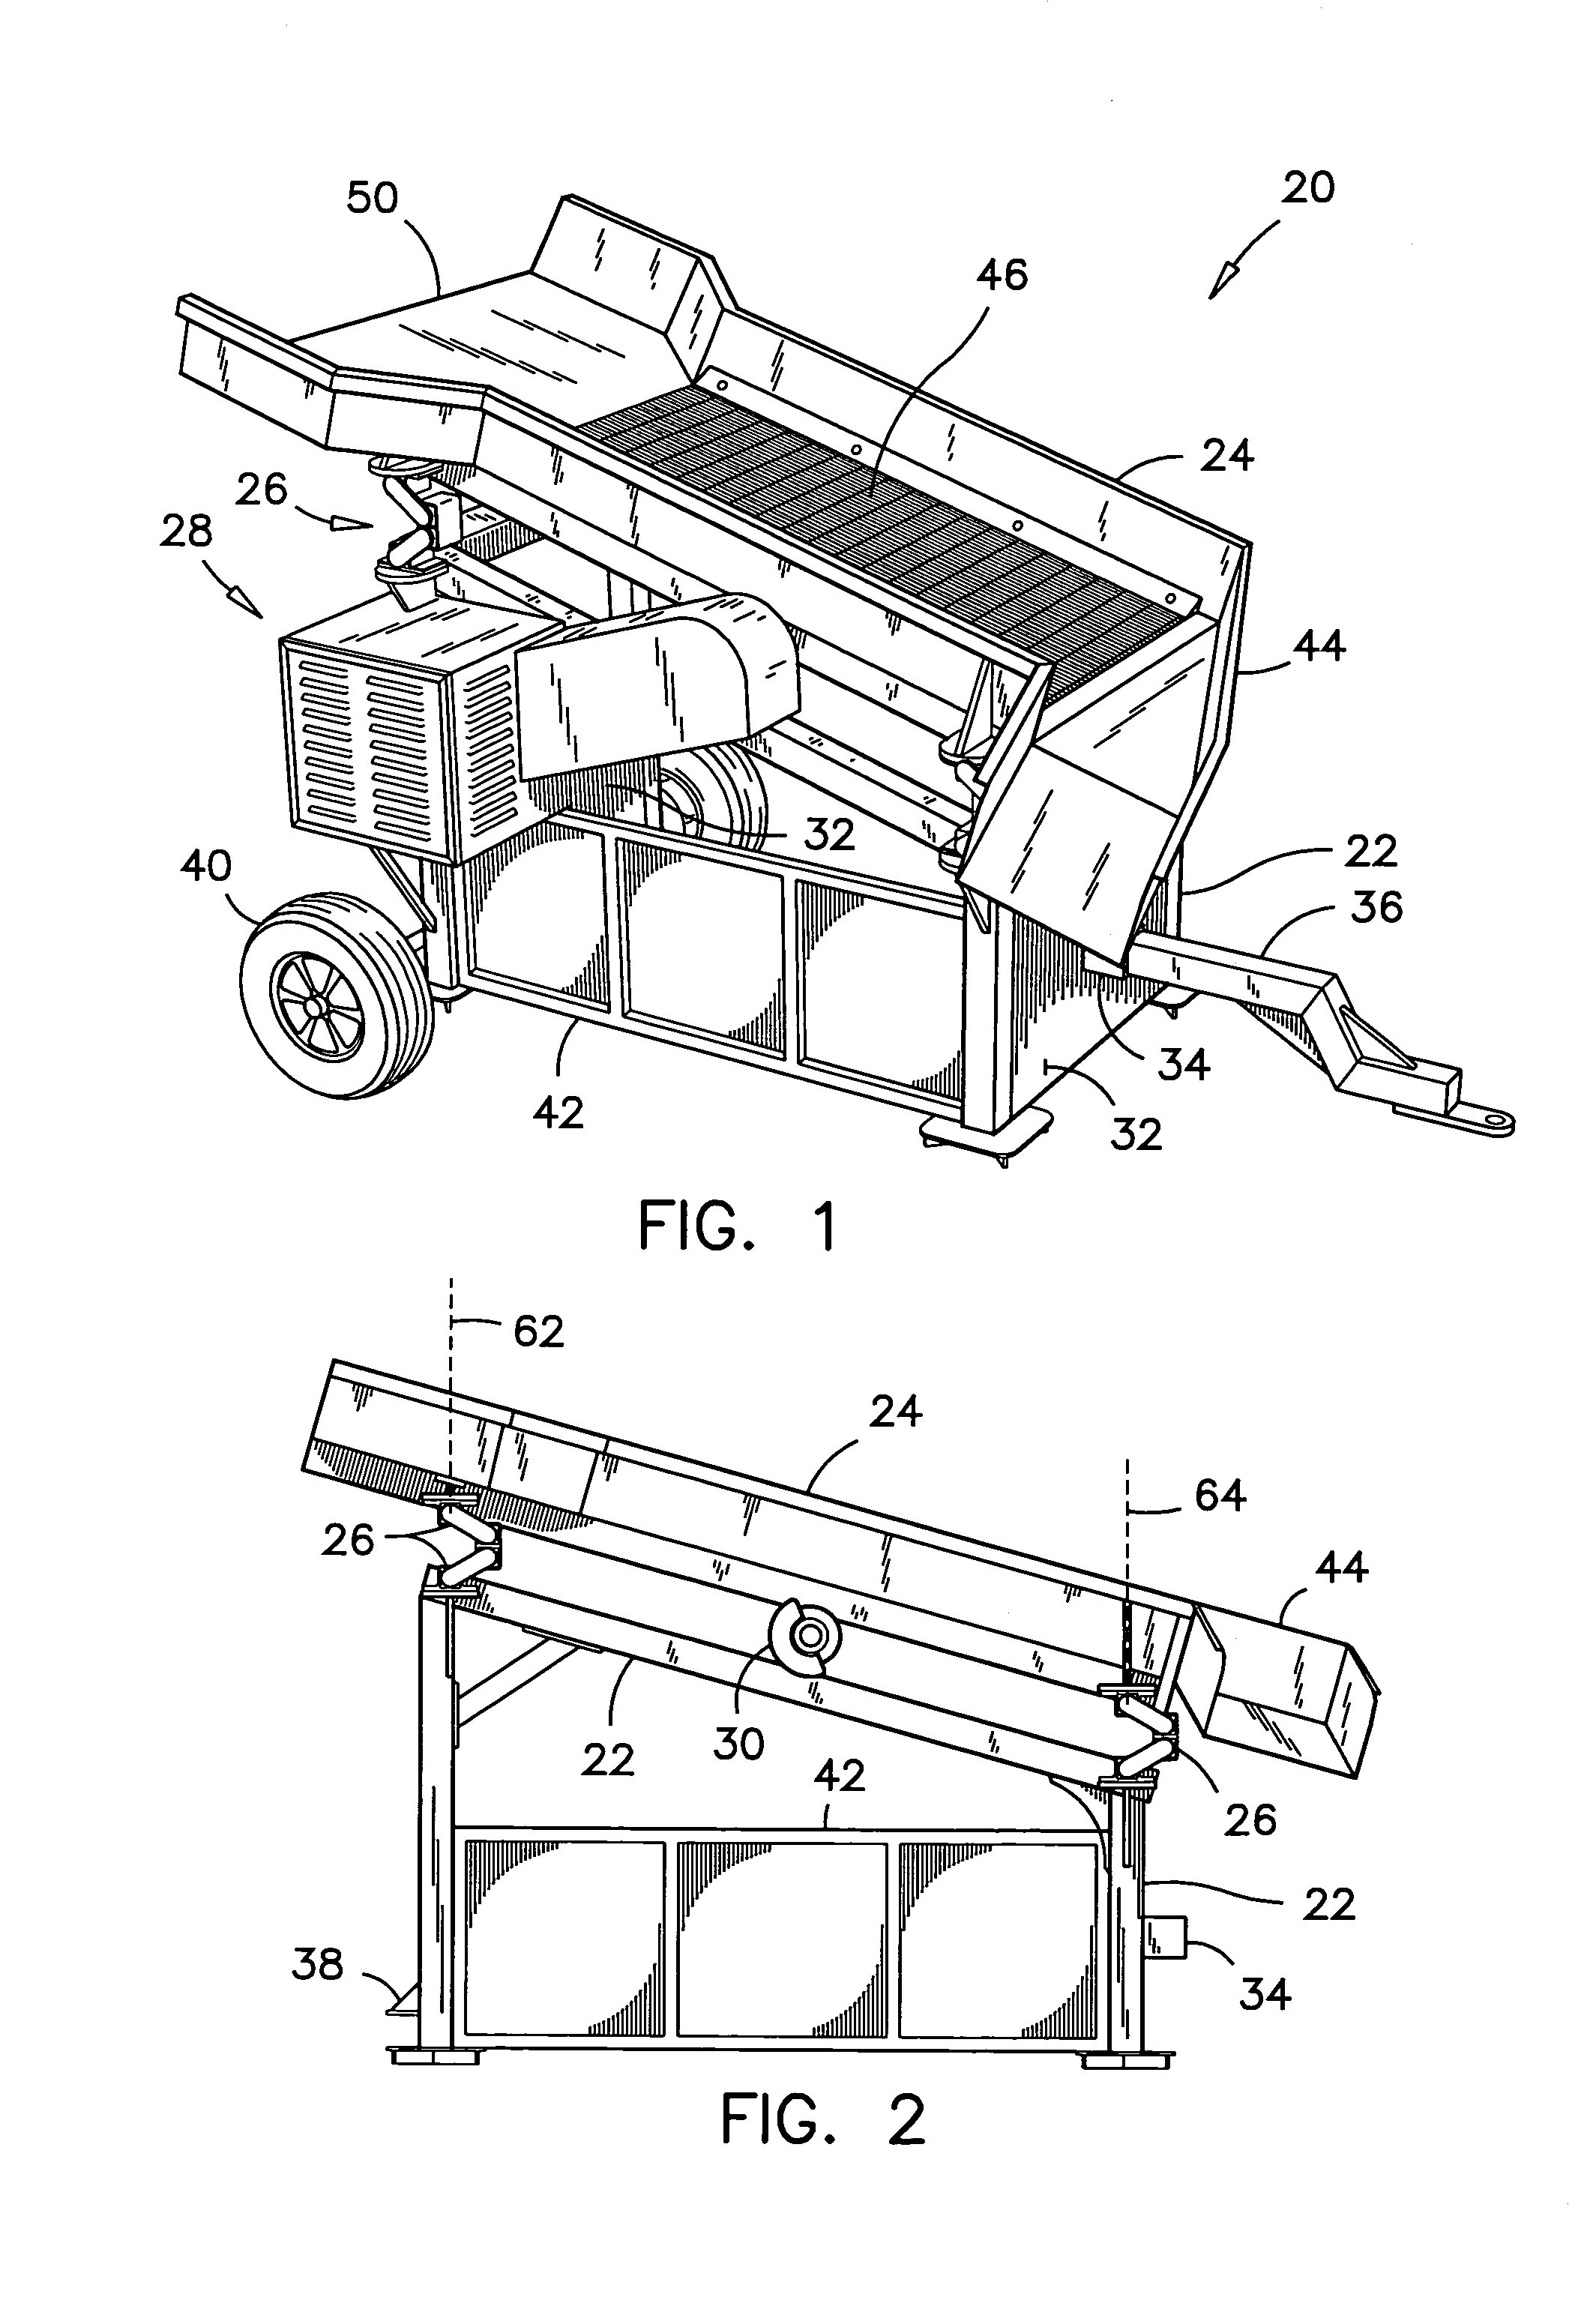 Vibrating screen with a loading pan